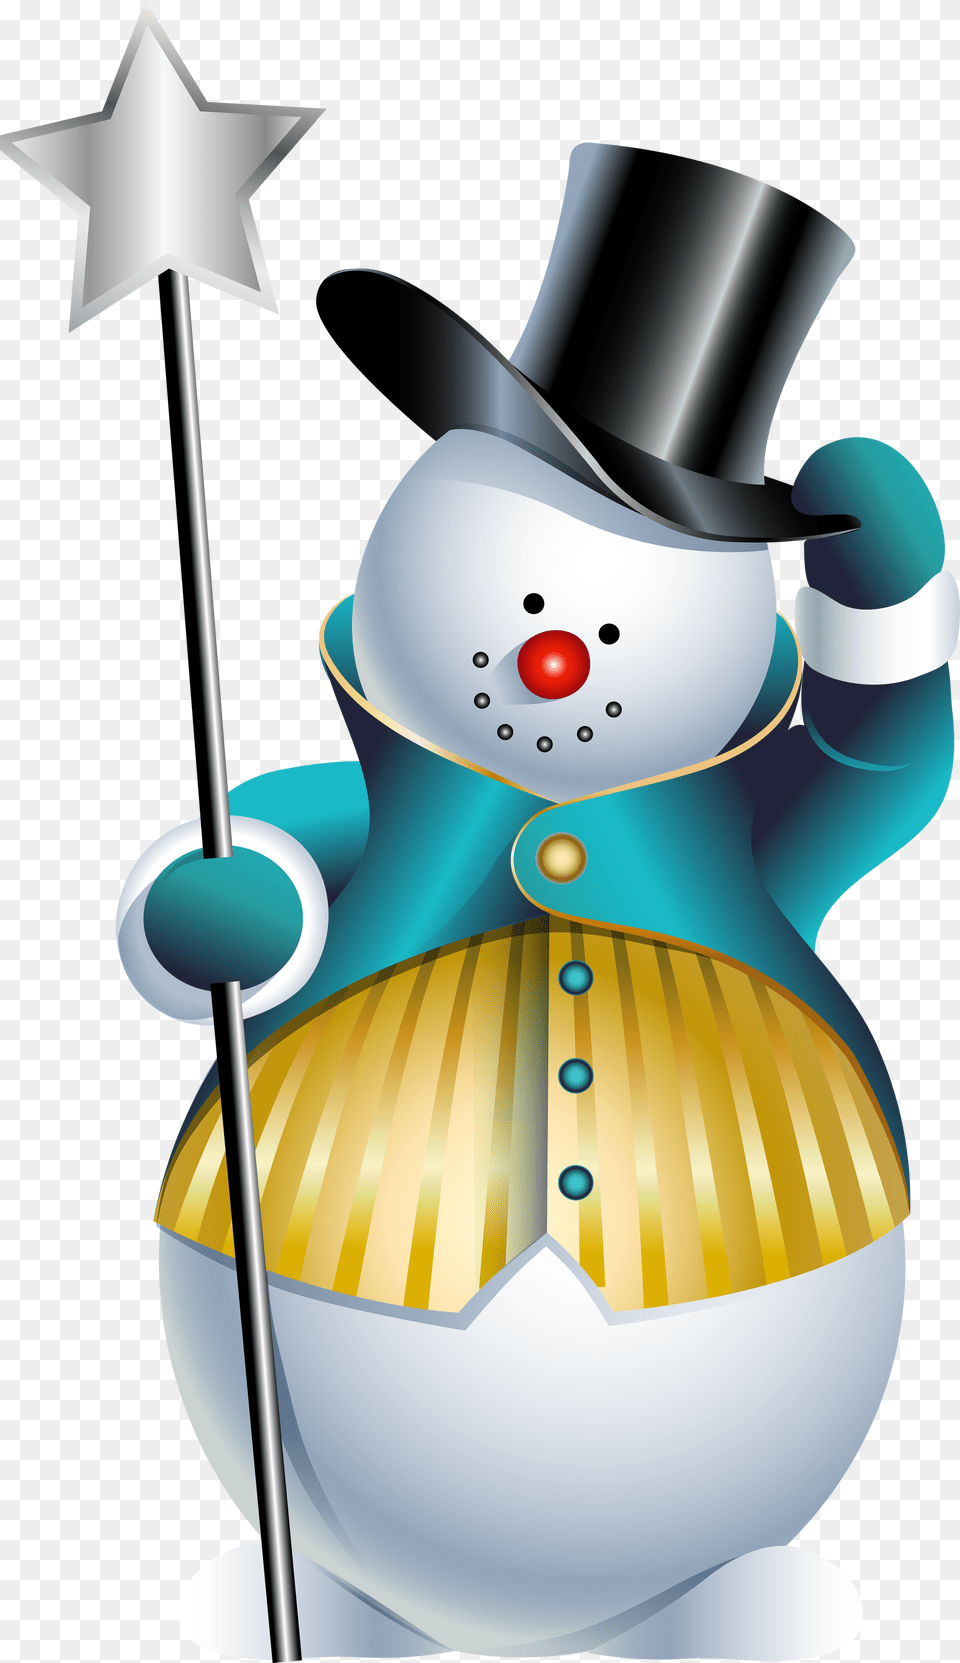 Snowman Image Cliparts Snowman, Nature, Outdoors, Winter, Snow Png